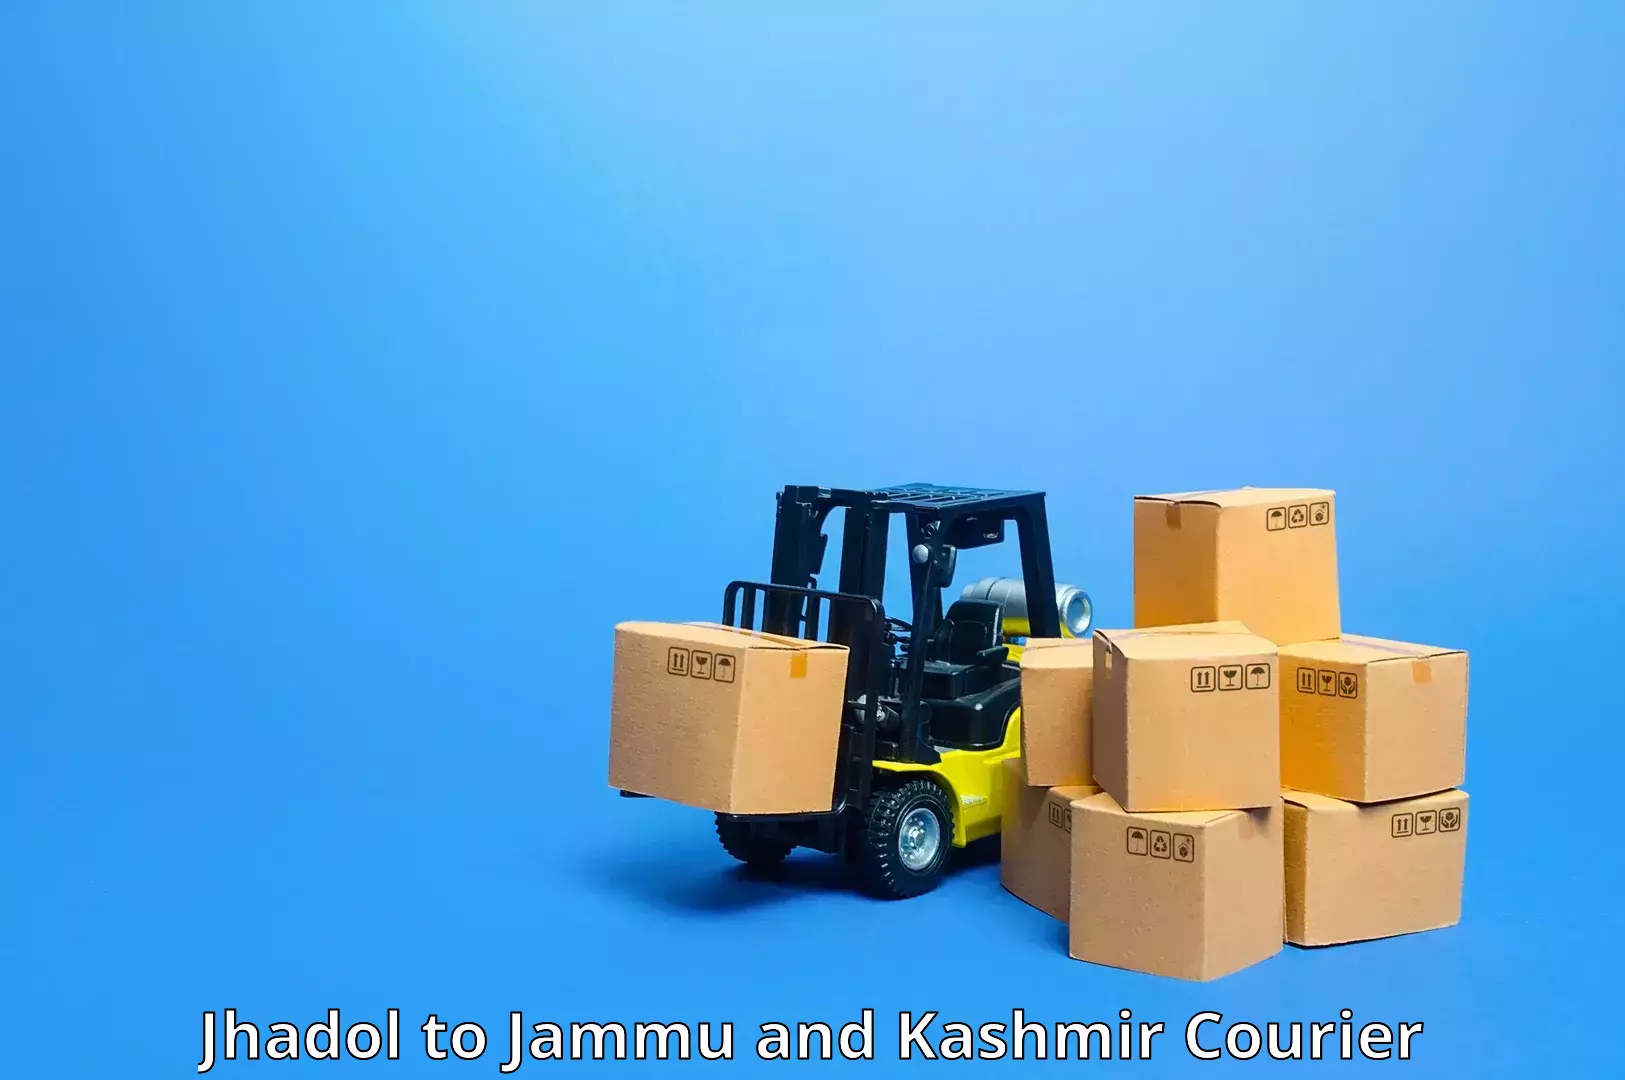 Express delivery capabilities Jhadol to Jammu and Kashmir